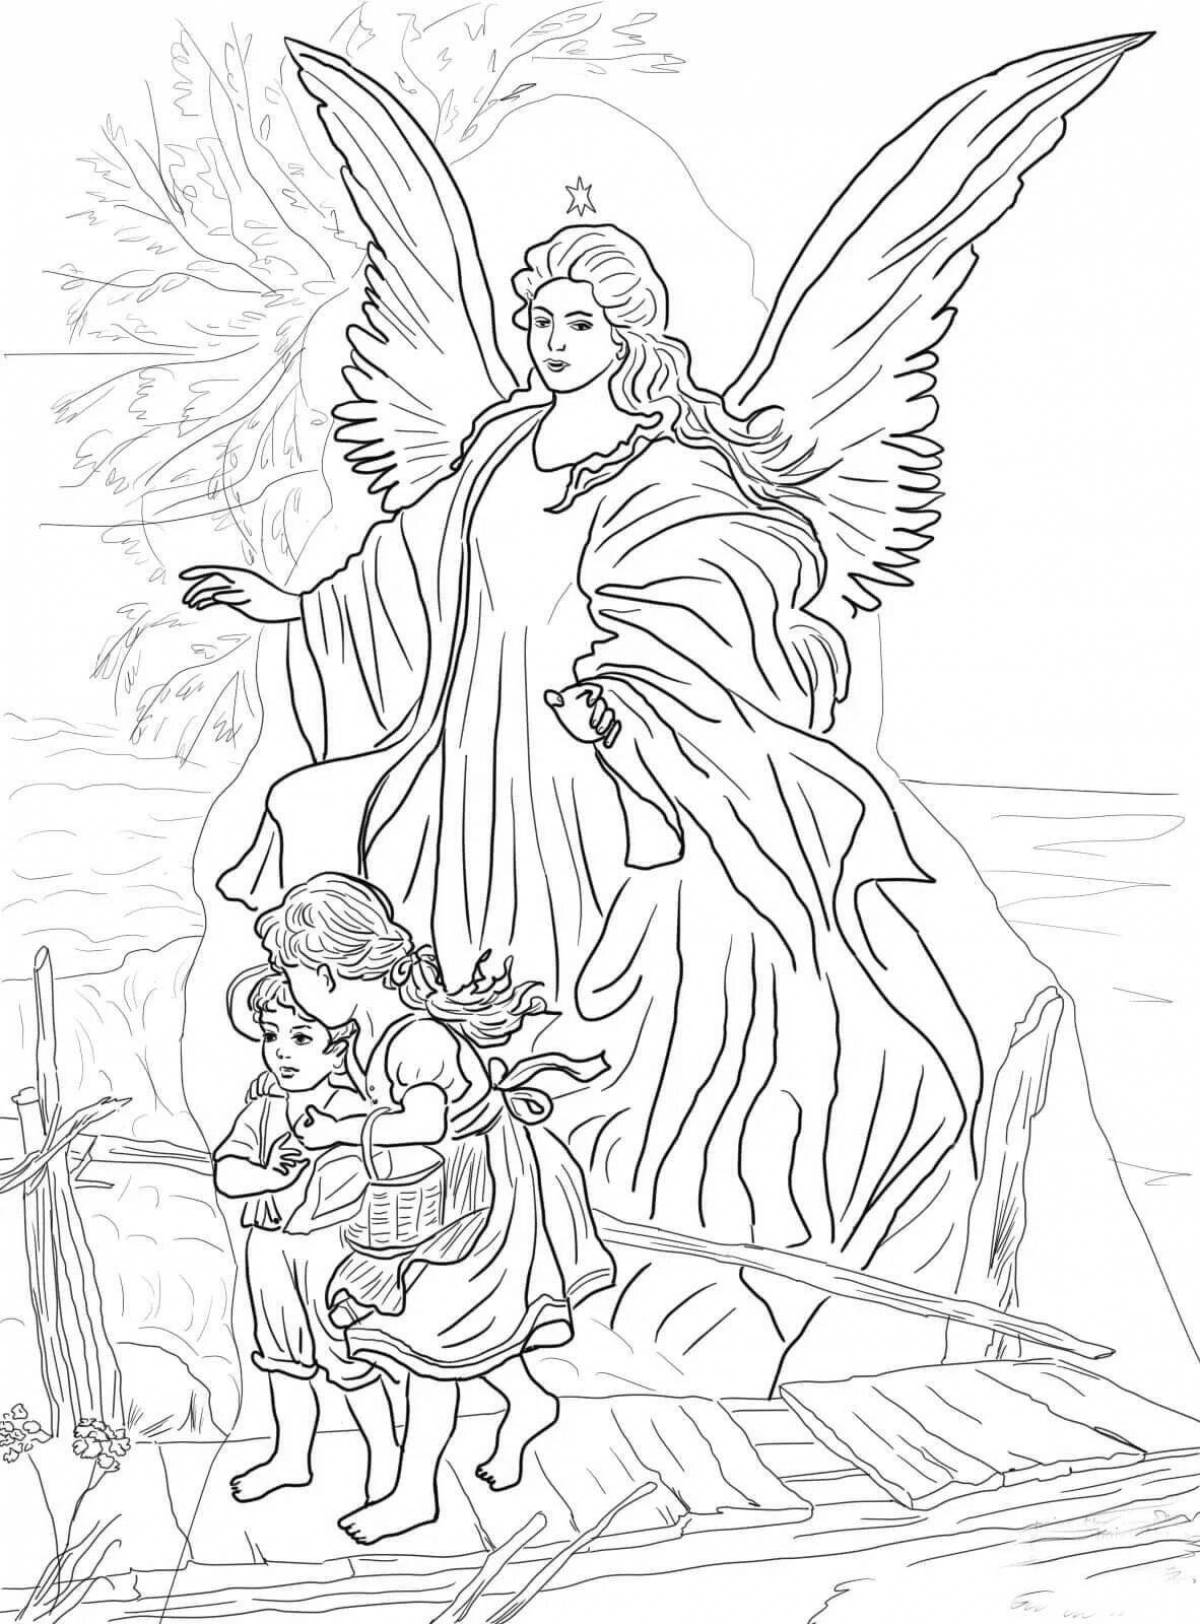 Divinely inspired guardian angel coloring page